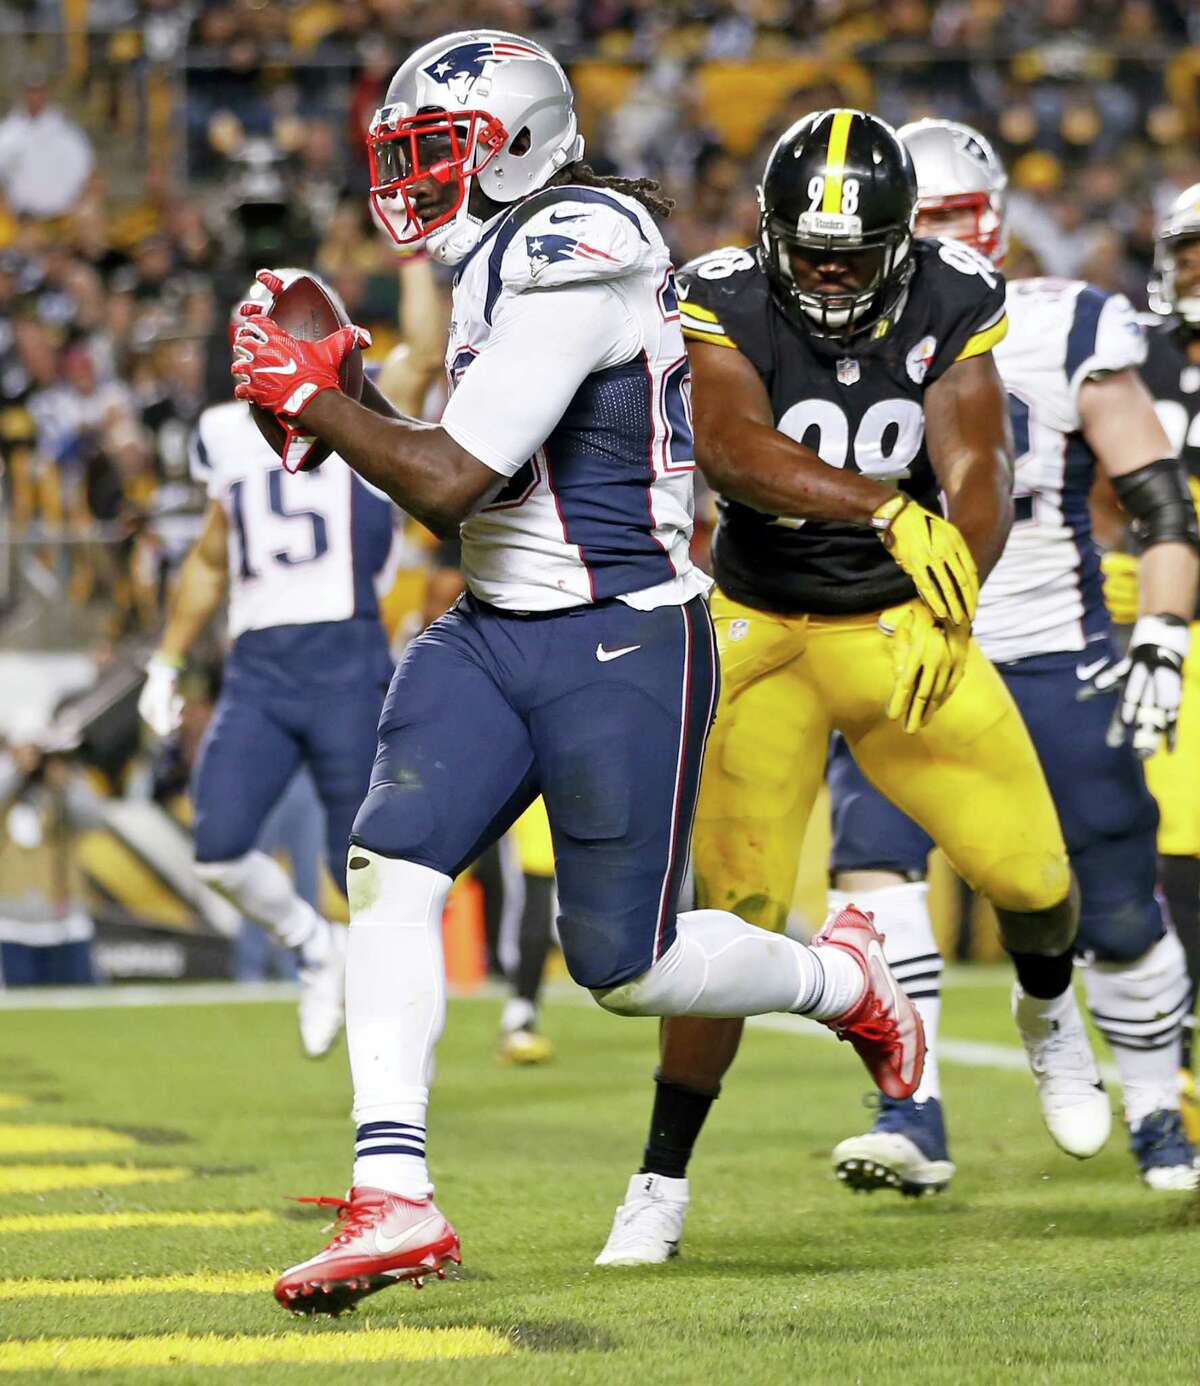 Patriots running back LeGarrette Blount (29) gets into the end zone.